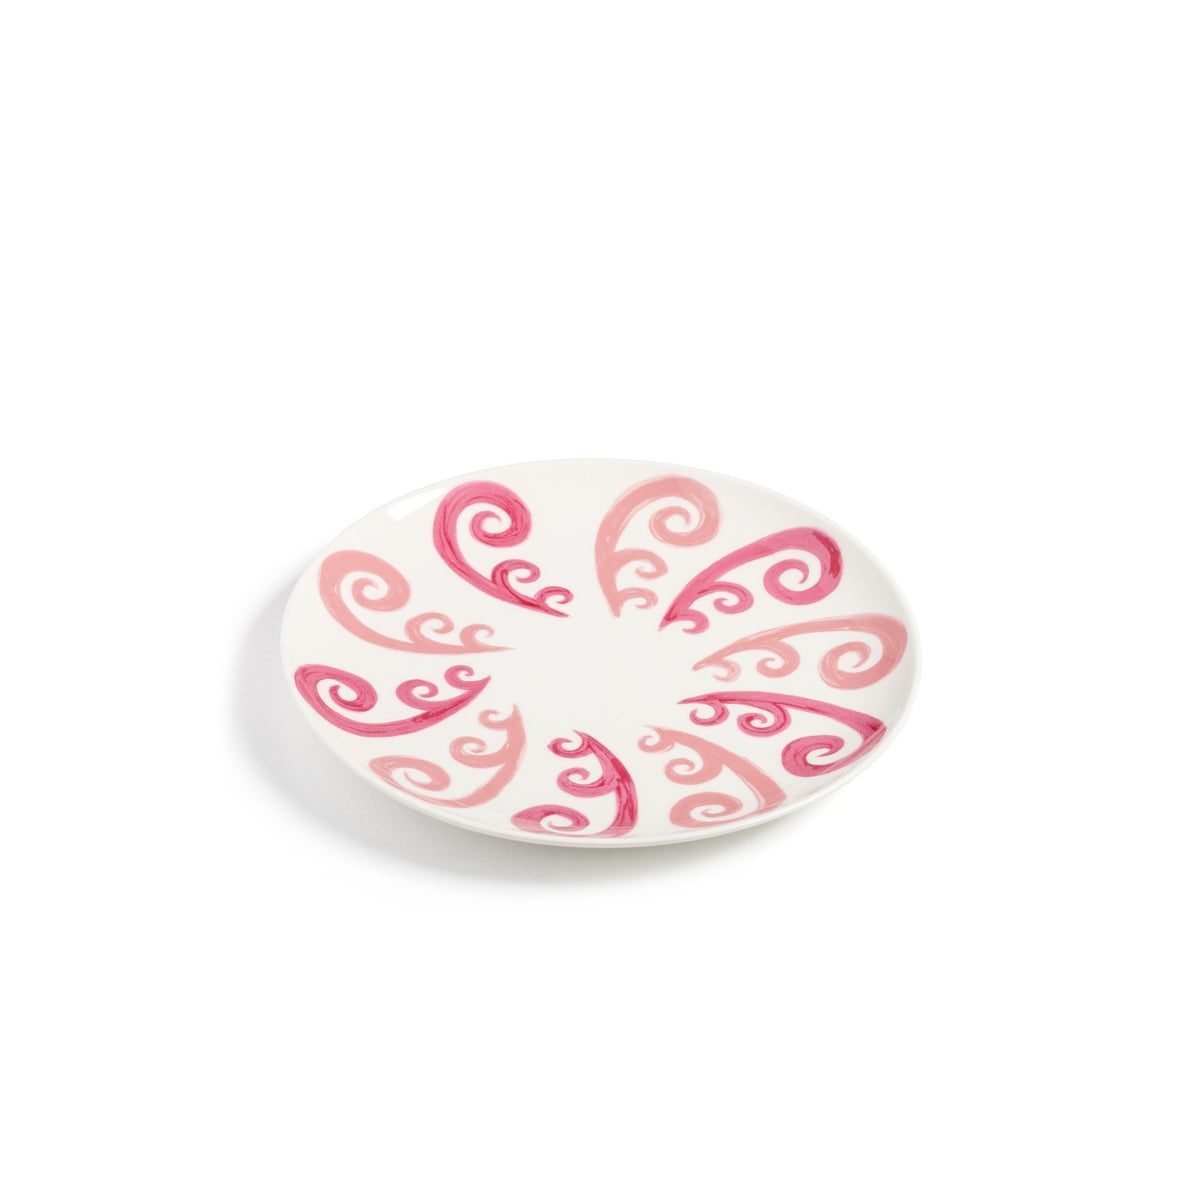 Athenee Two Tone Pink Peacock Dessert Plate